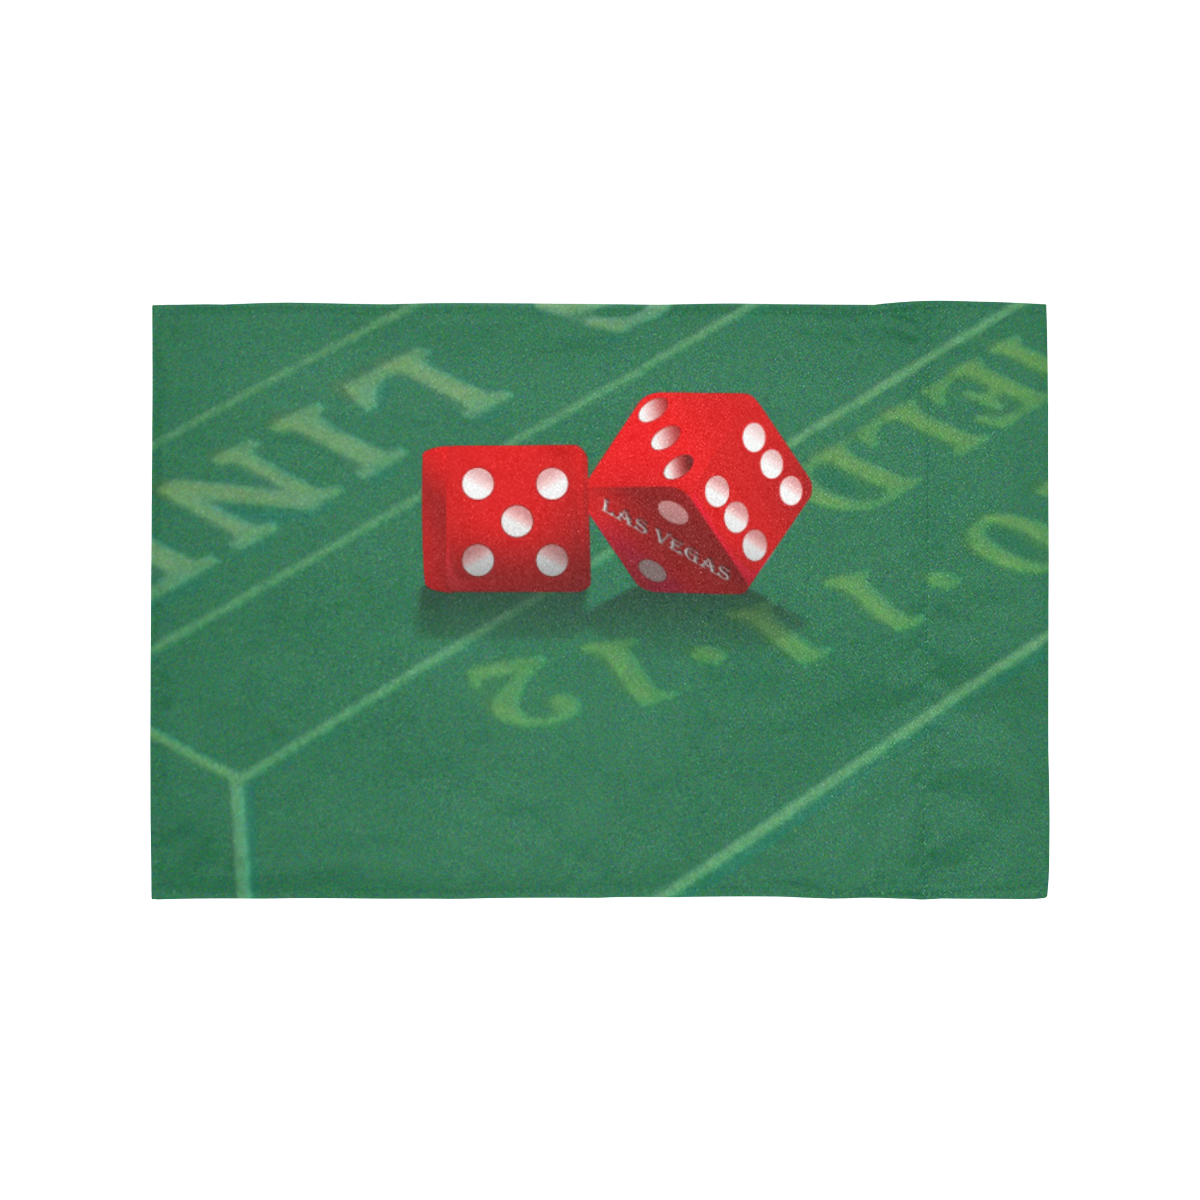 Las Vegas Dice on Craps Table Motorcycle Flag (Twin Sides)